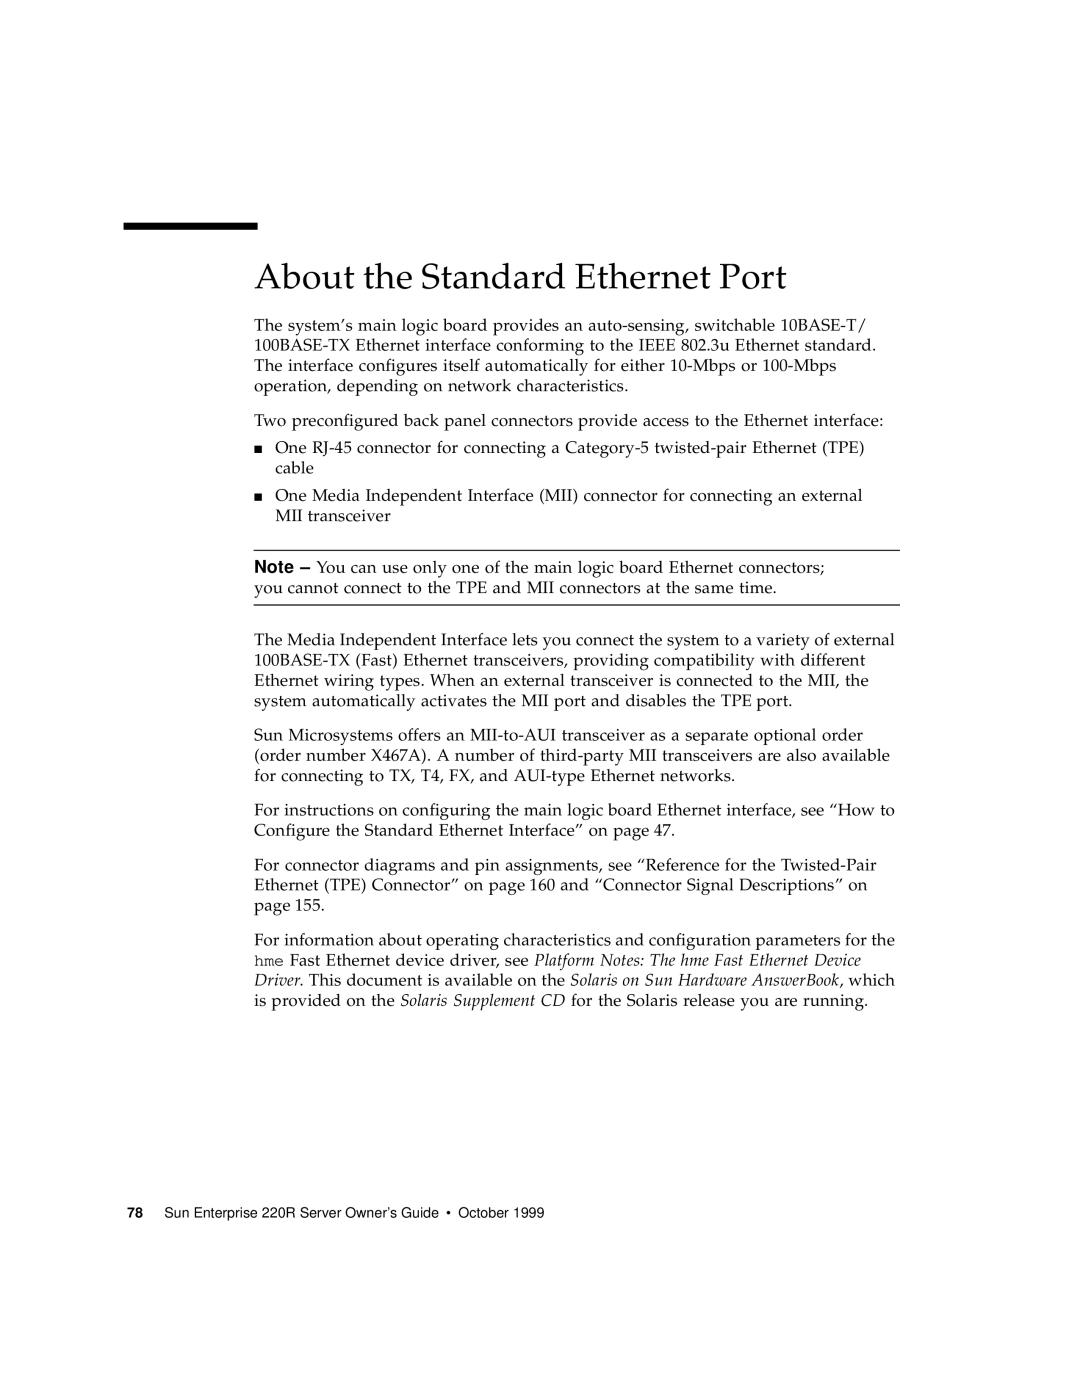 Sun Microsystems manual About the Standard Ethernet Port, Sun Enterprise 220R Server Owner’s Guide October 